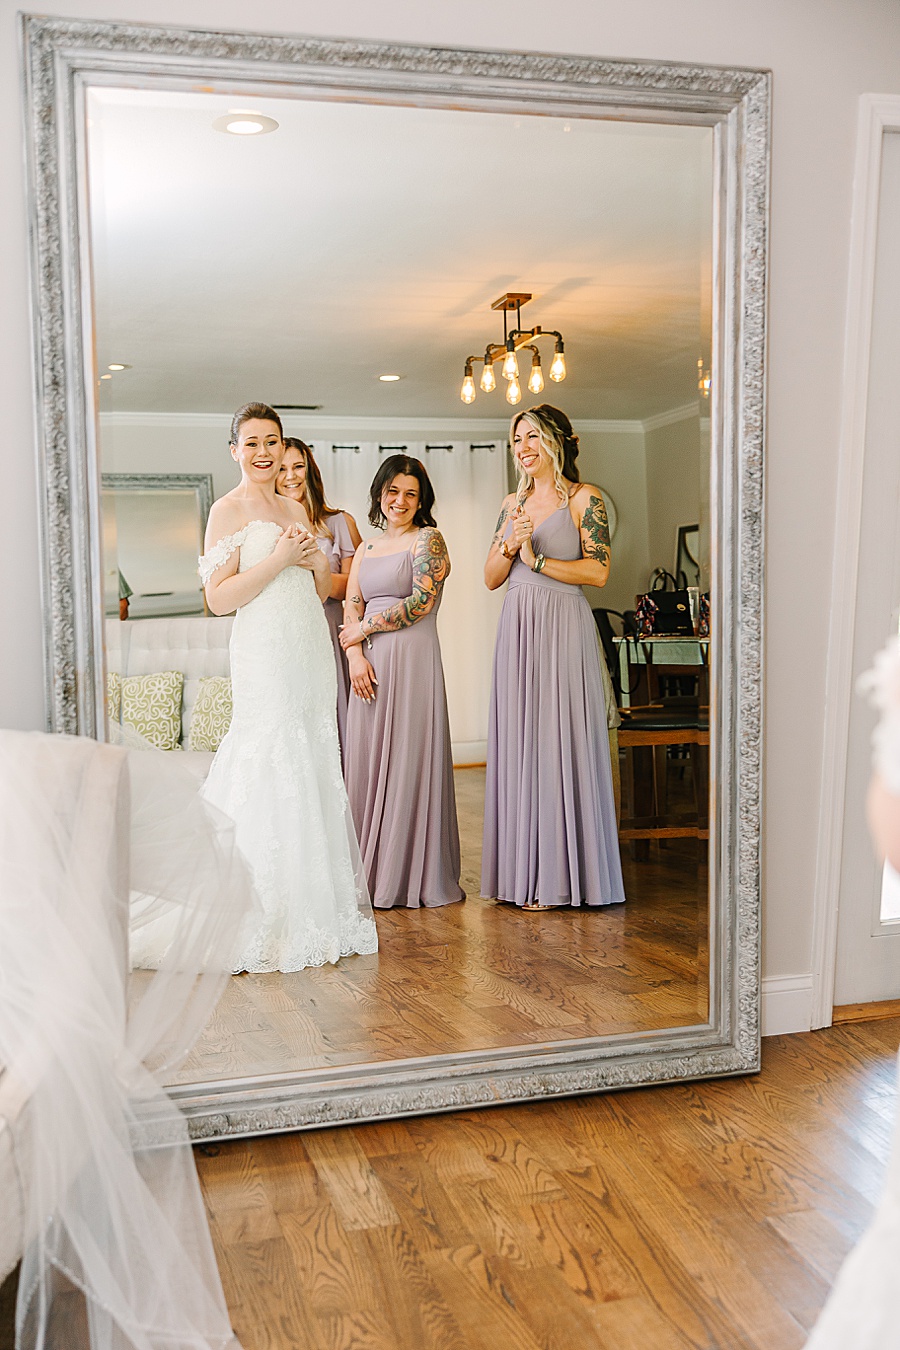 Bride seeing herself in her wedding dress for the first time